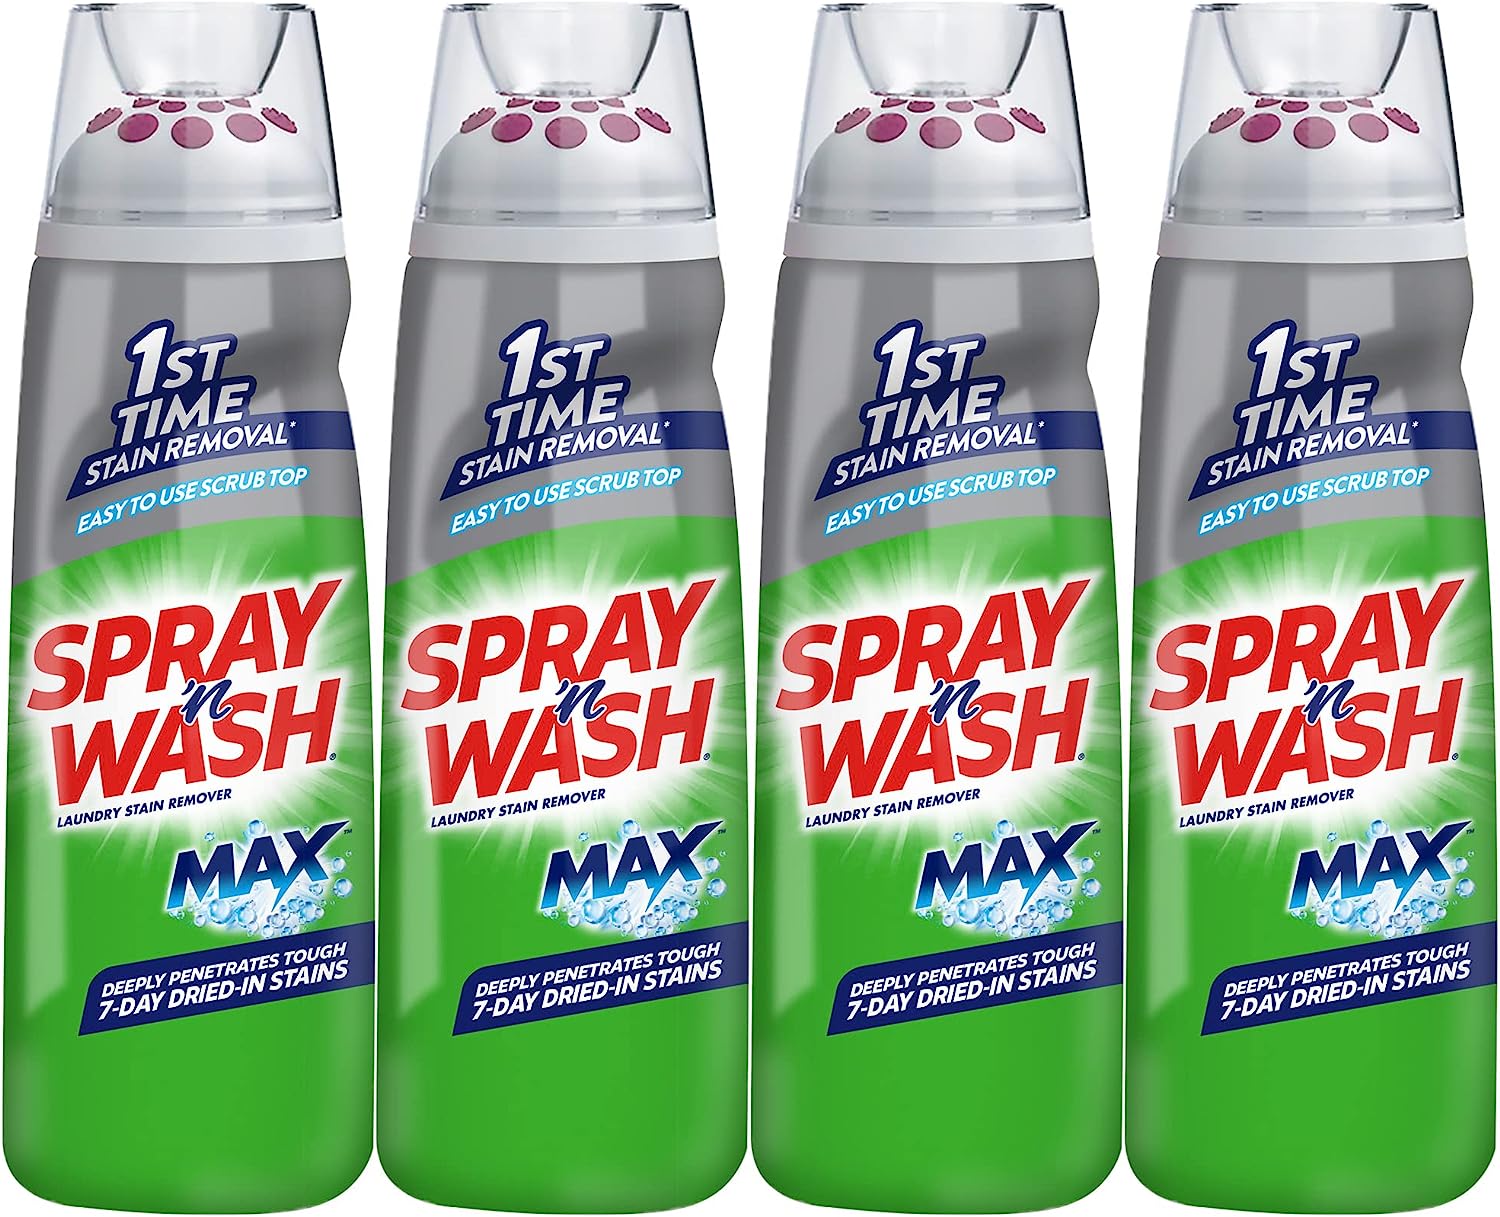 Spray 'n Wash Pre-Treat Max Laundry Stain Remover Gel [...]